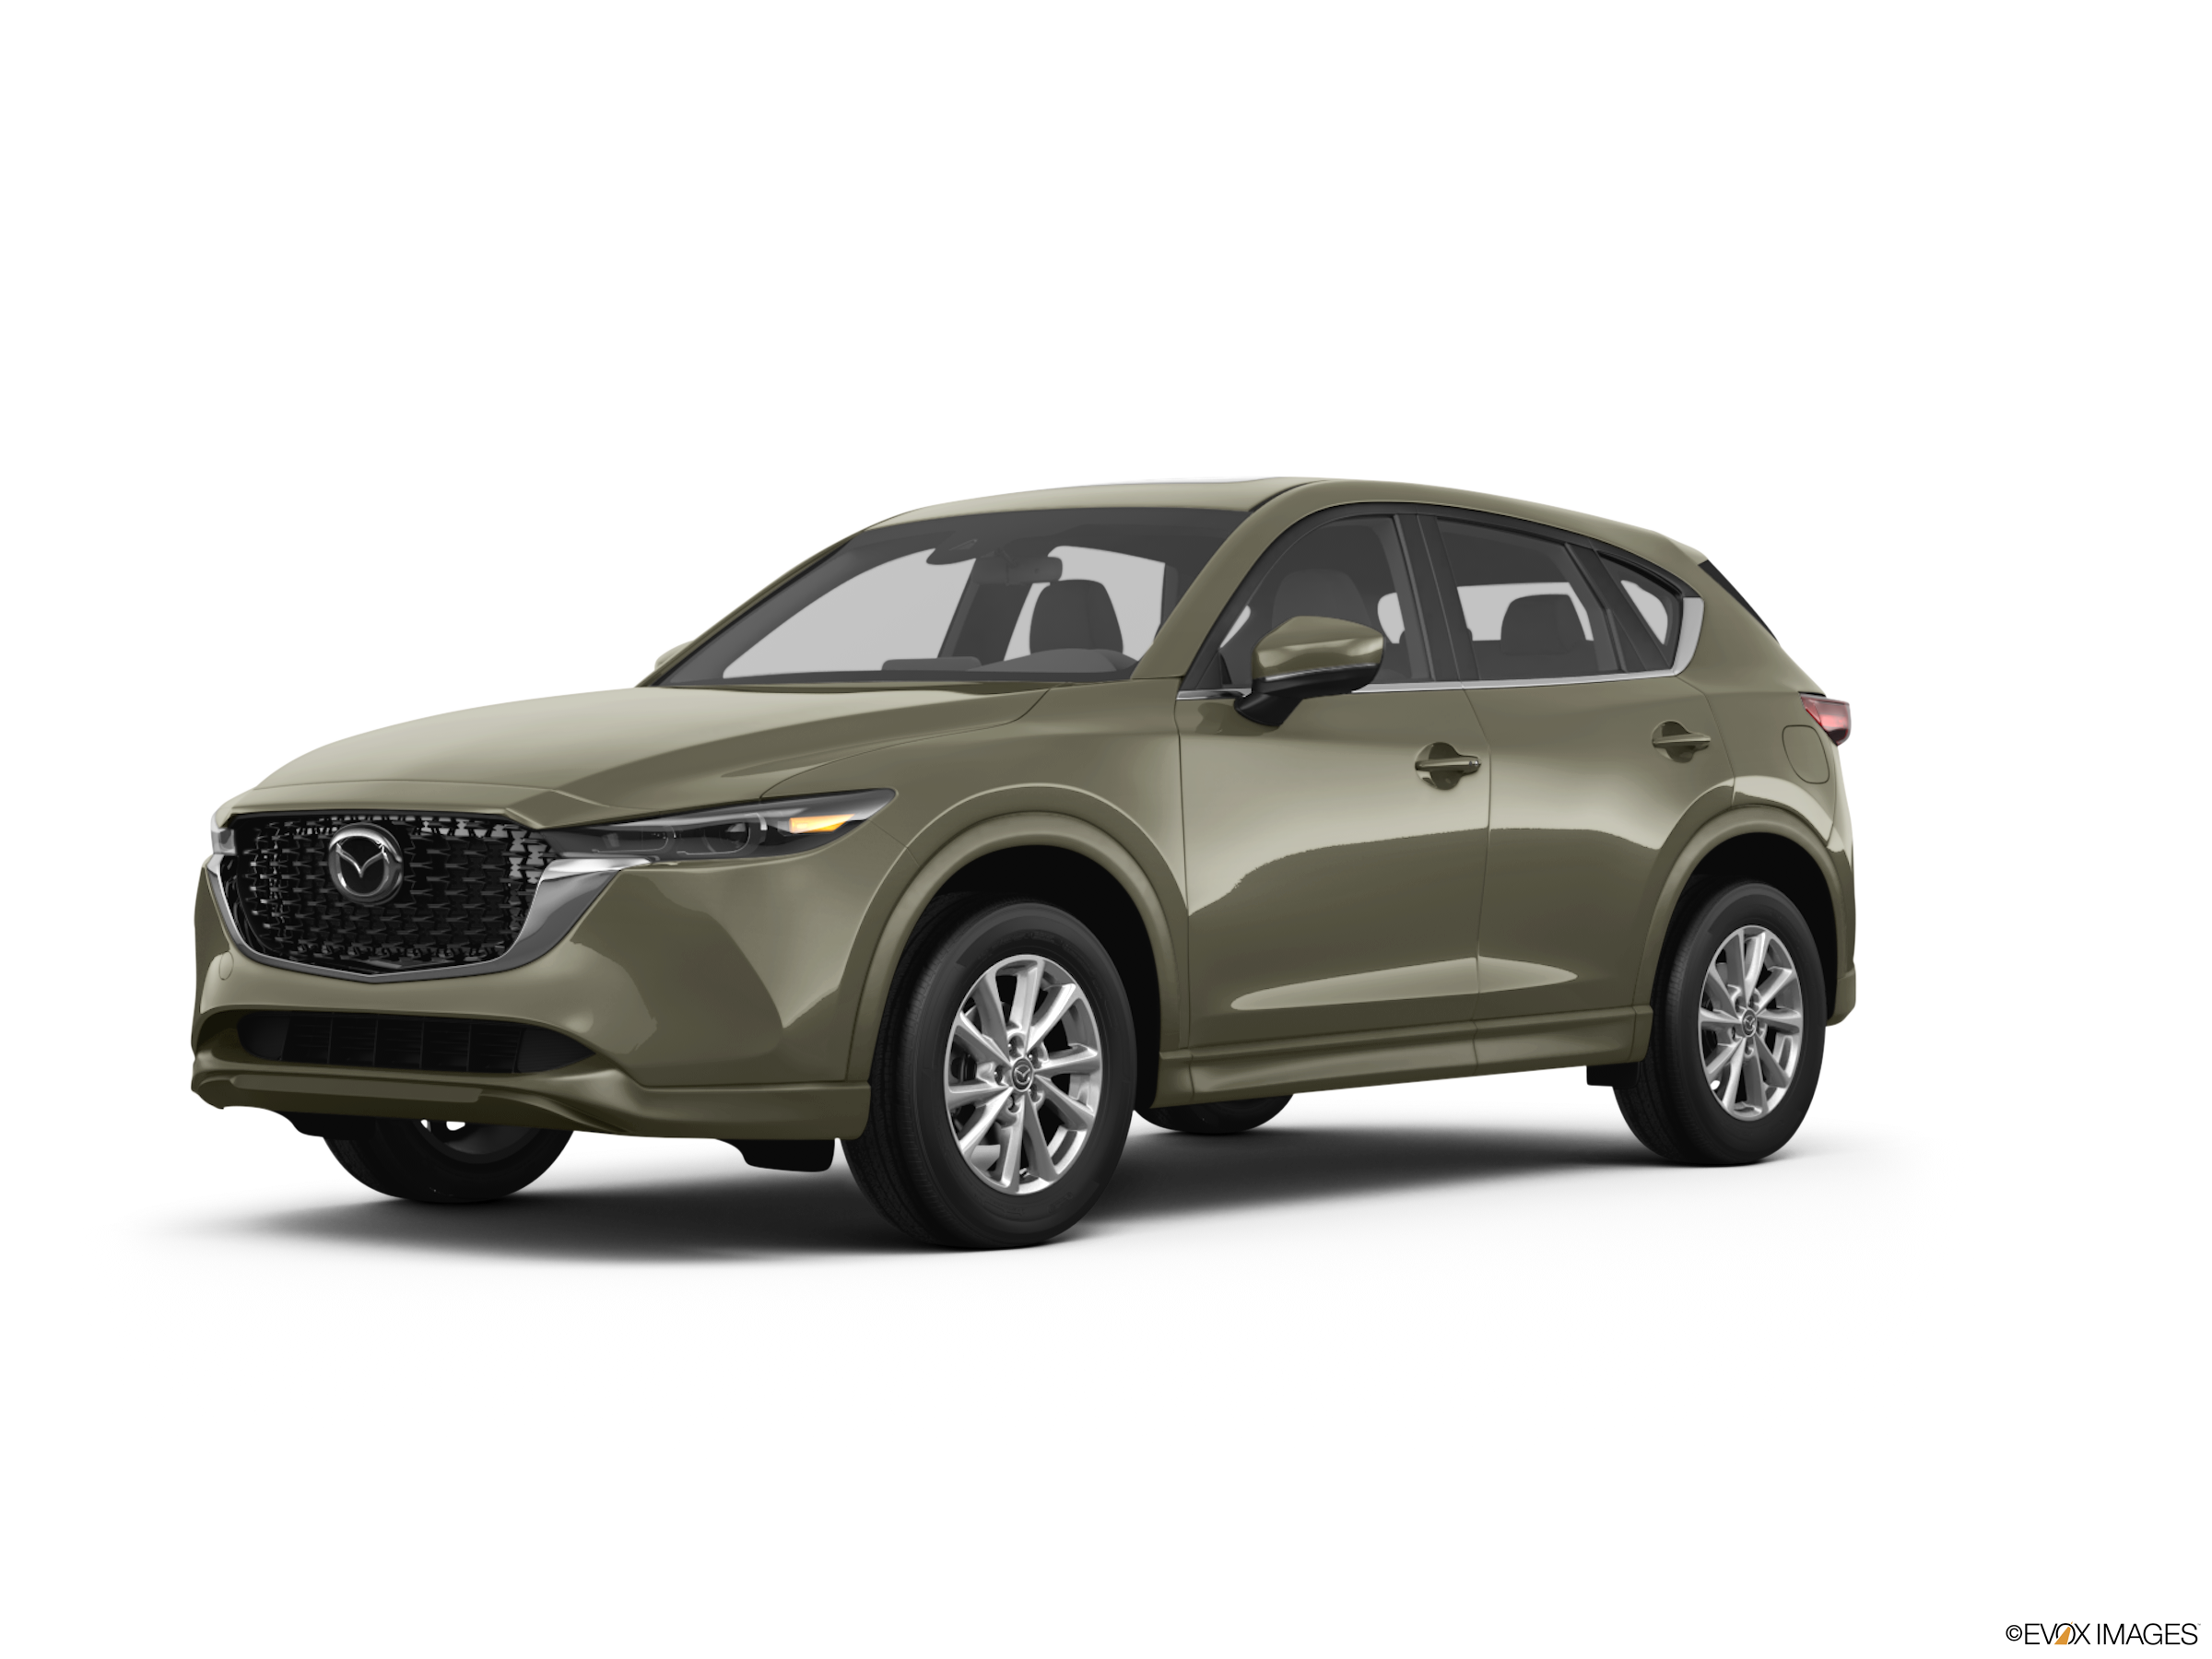 Is the 2021 Mazda CX-5 a Good Car? 4 Pros and 4 Cons